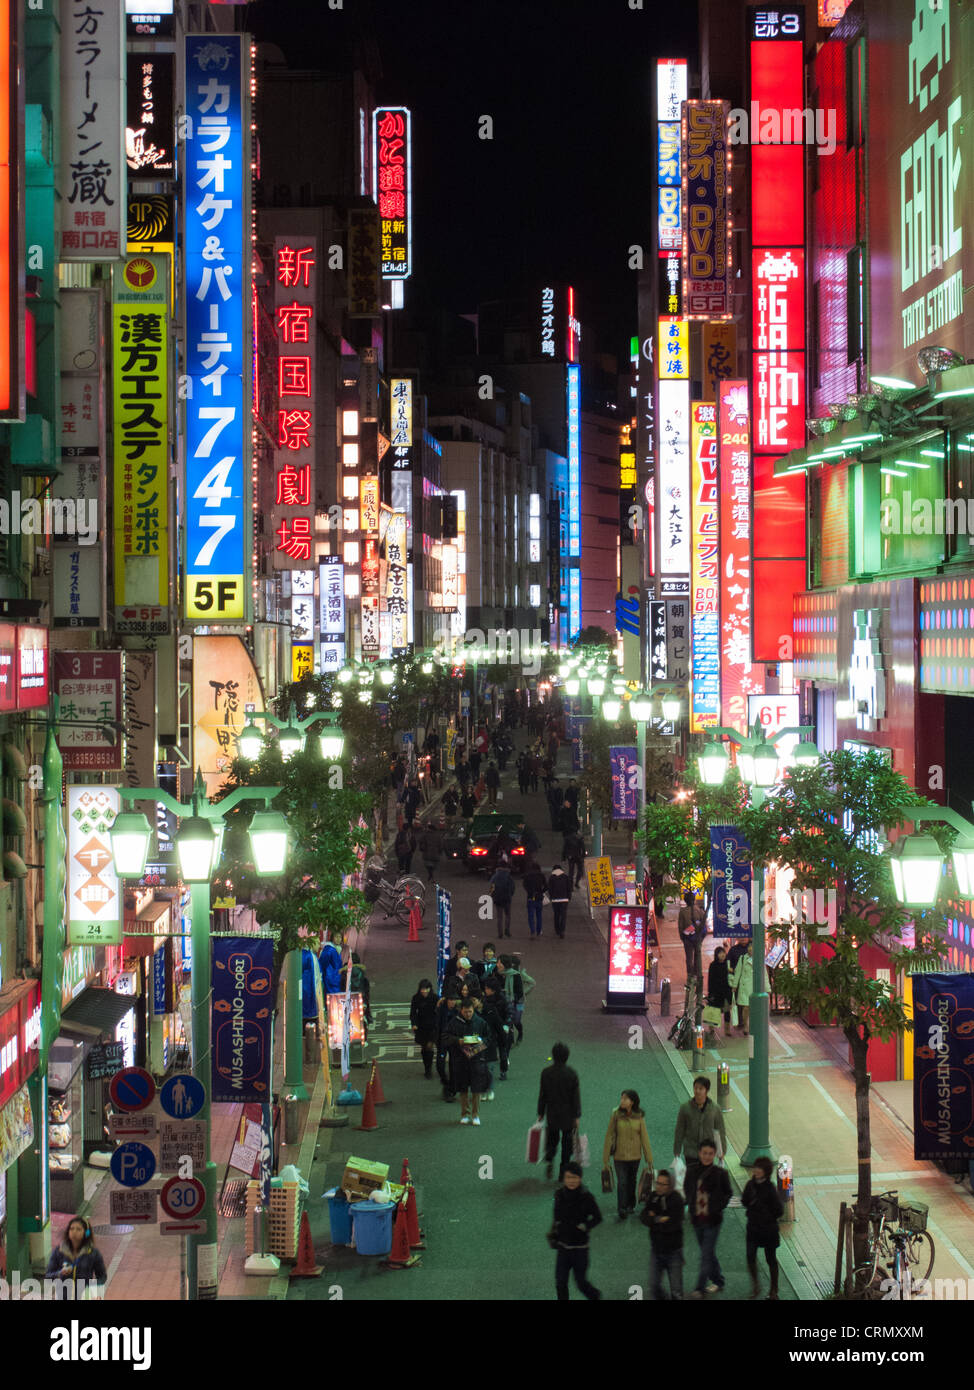 Night scene of neon covered buildings in the Shinjuku district of Tokyo, Japan Stock Photo